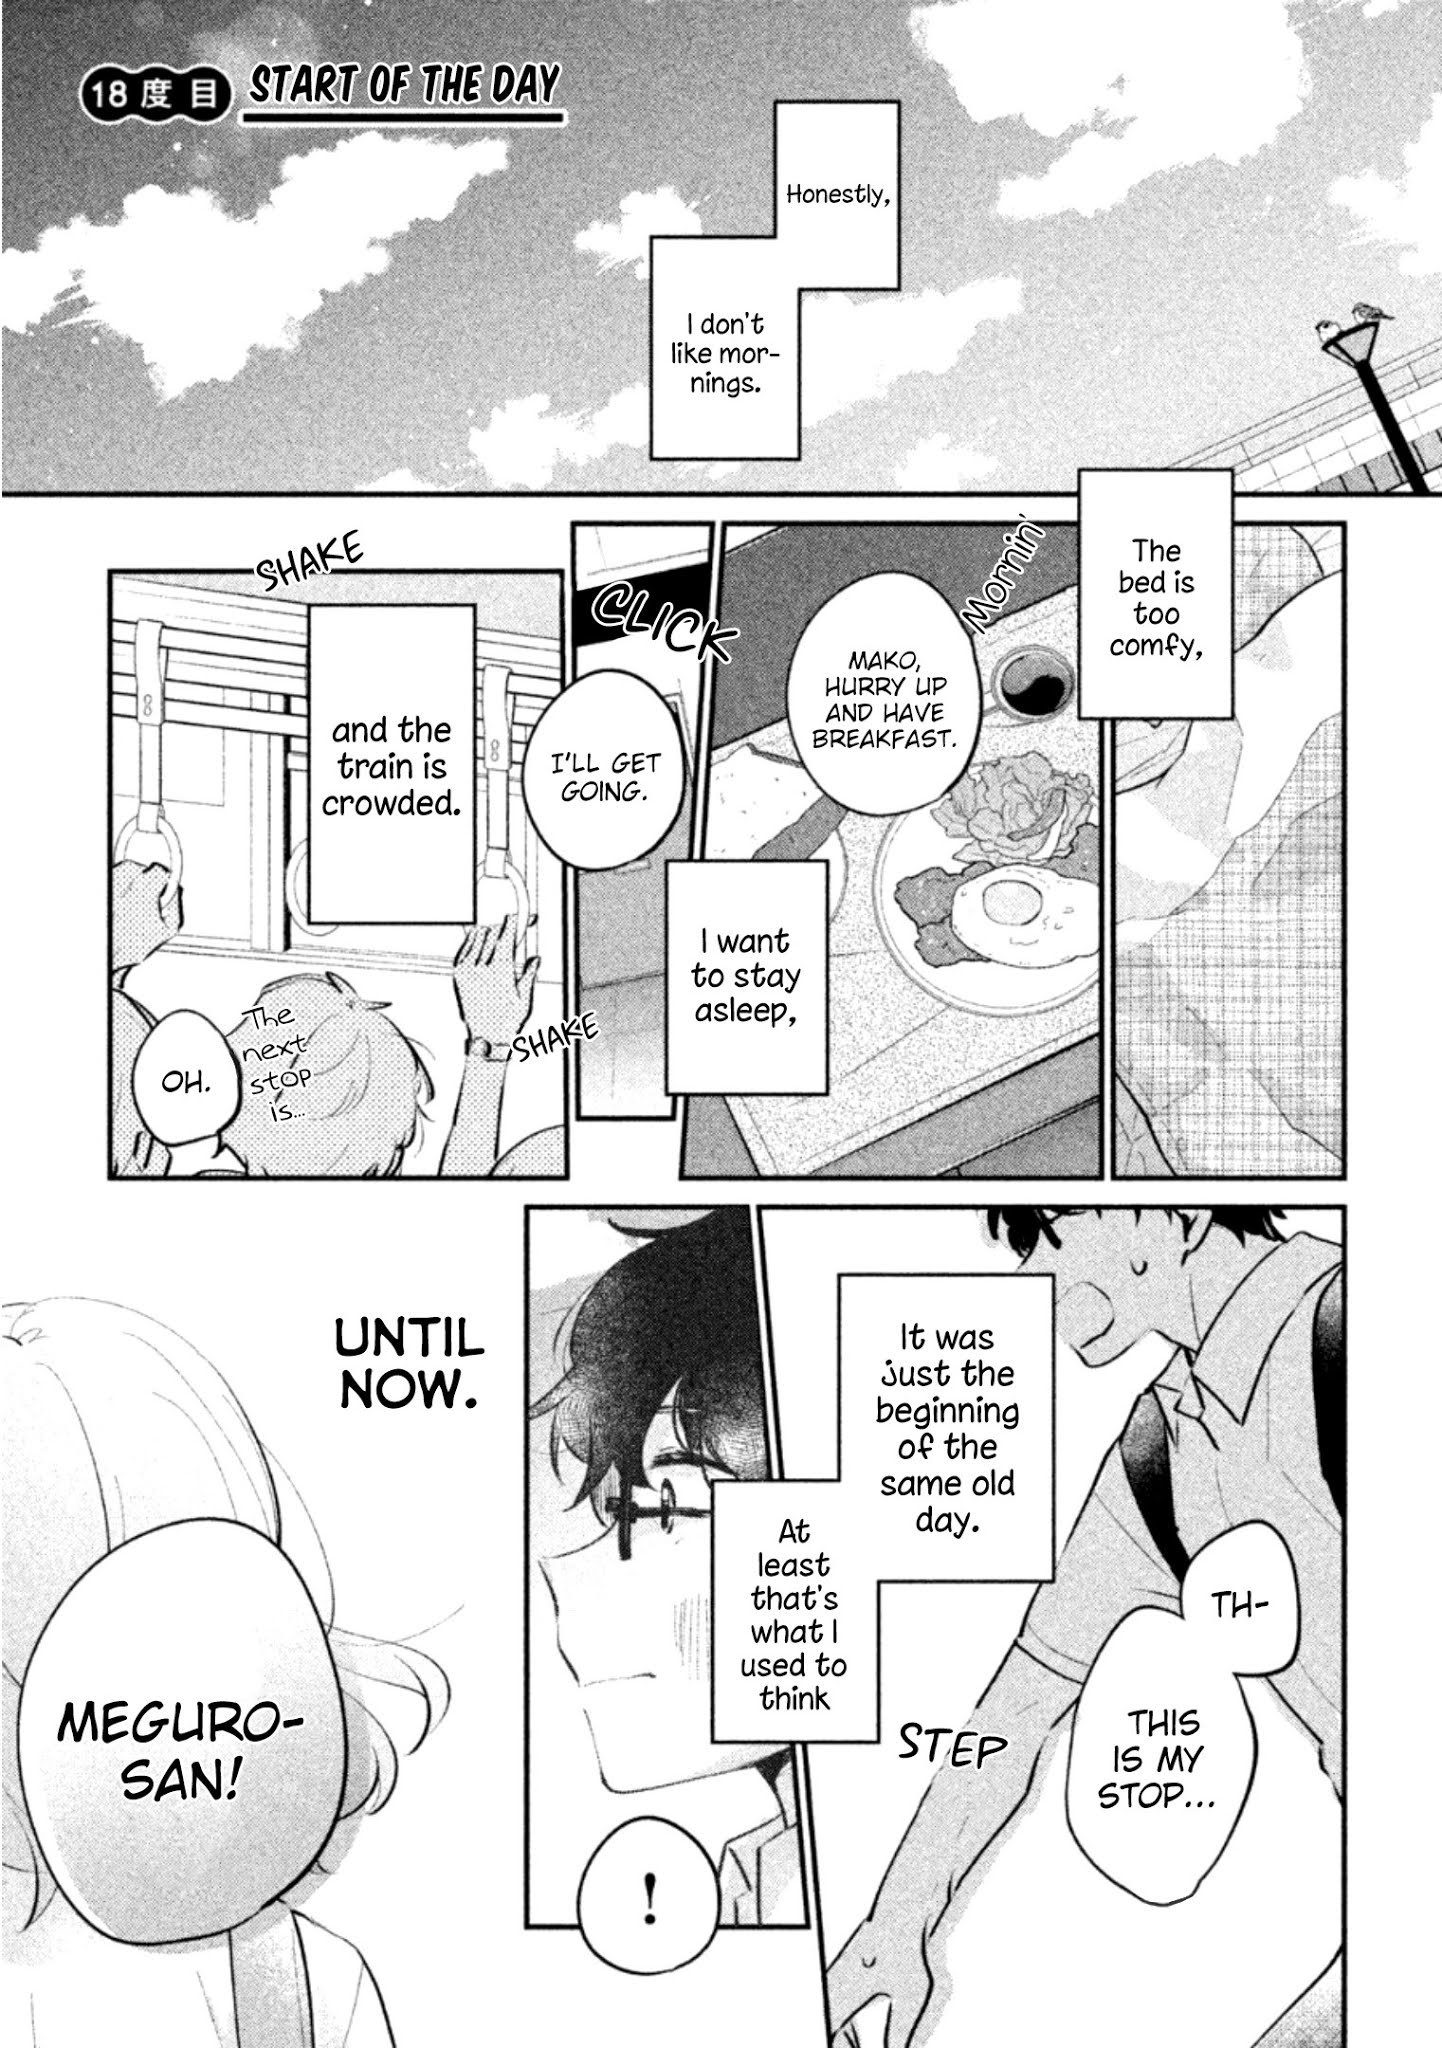 It's Not Meguro-san's First Time chapter 18 page 2